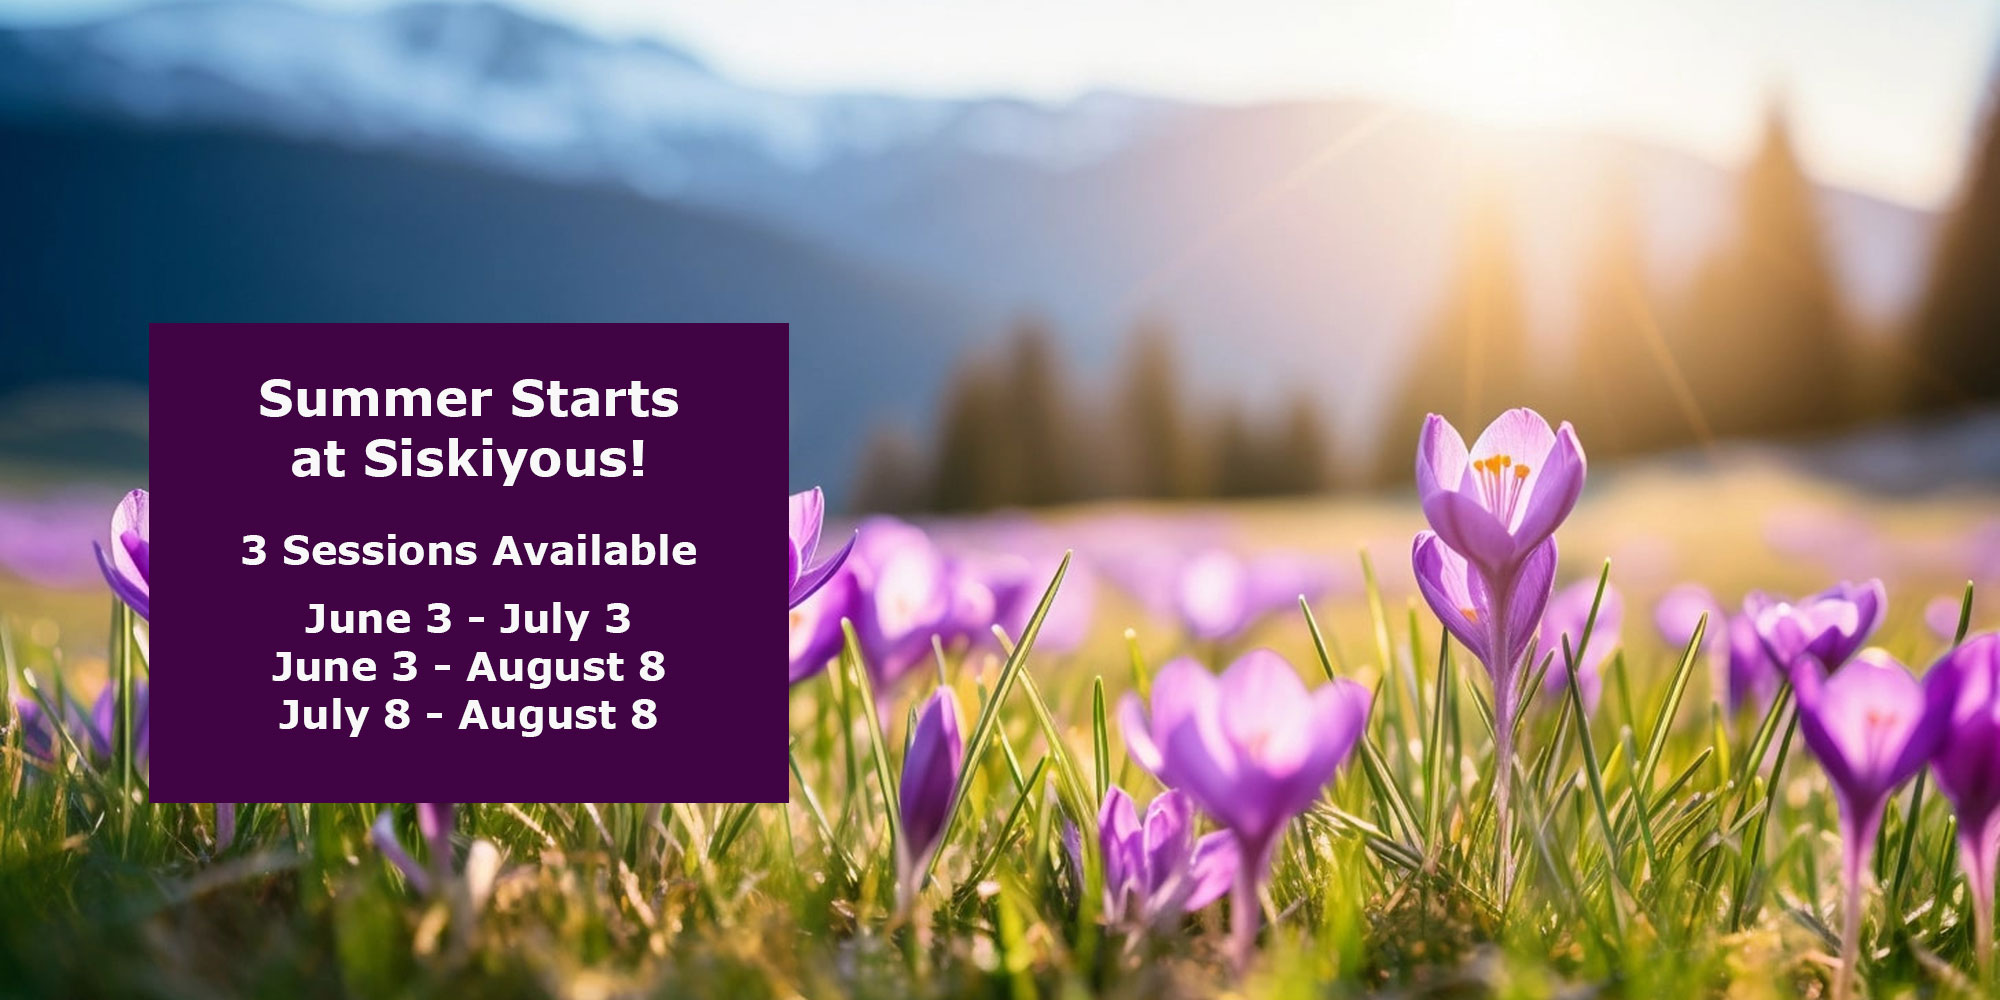 Summer Starts at Siskiyous! 3 Sessions Available: June 3 - July 3, June 3 - August 8, July 8 - August 8.